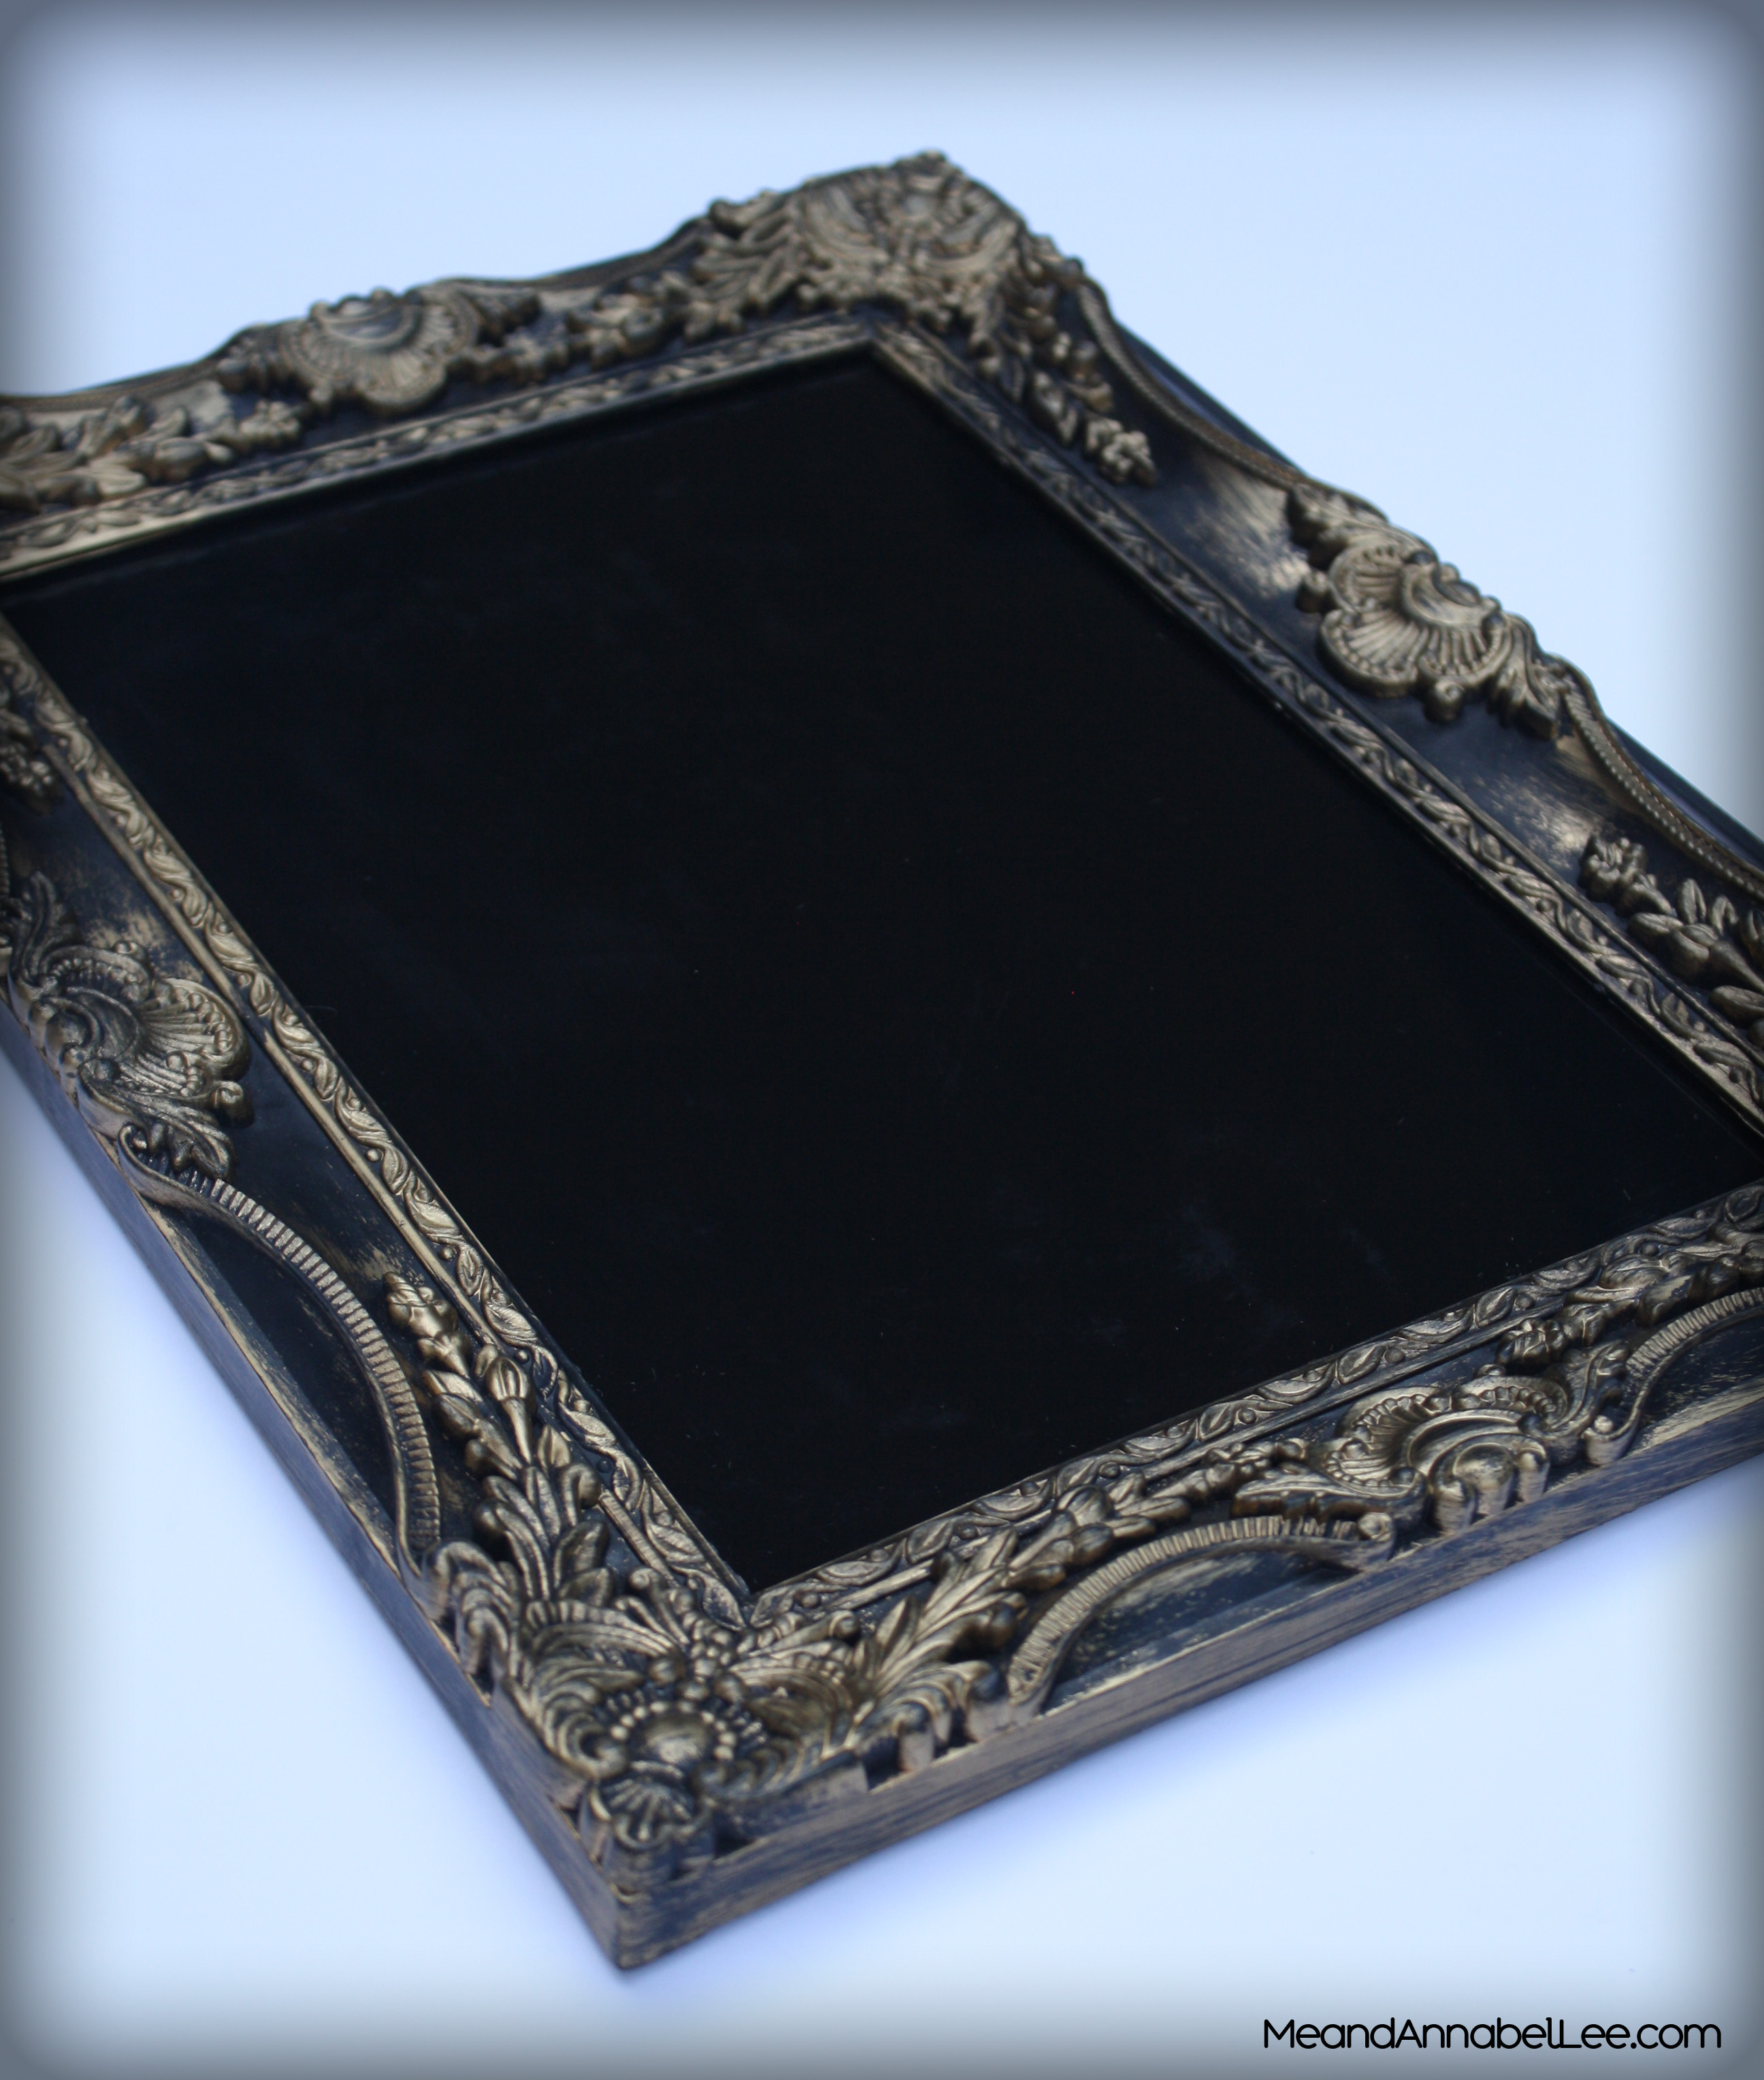 DIY Ornate Black & Gold Gothic Serving Tray - Transform a Thrift Store Frame into a Tray with this Goth It Yourself Project - www.MeandAnnabelLee.com - Blog for all things Dark, Gothic, Victorian, & Unusual